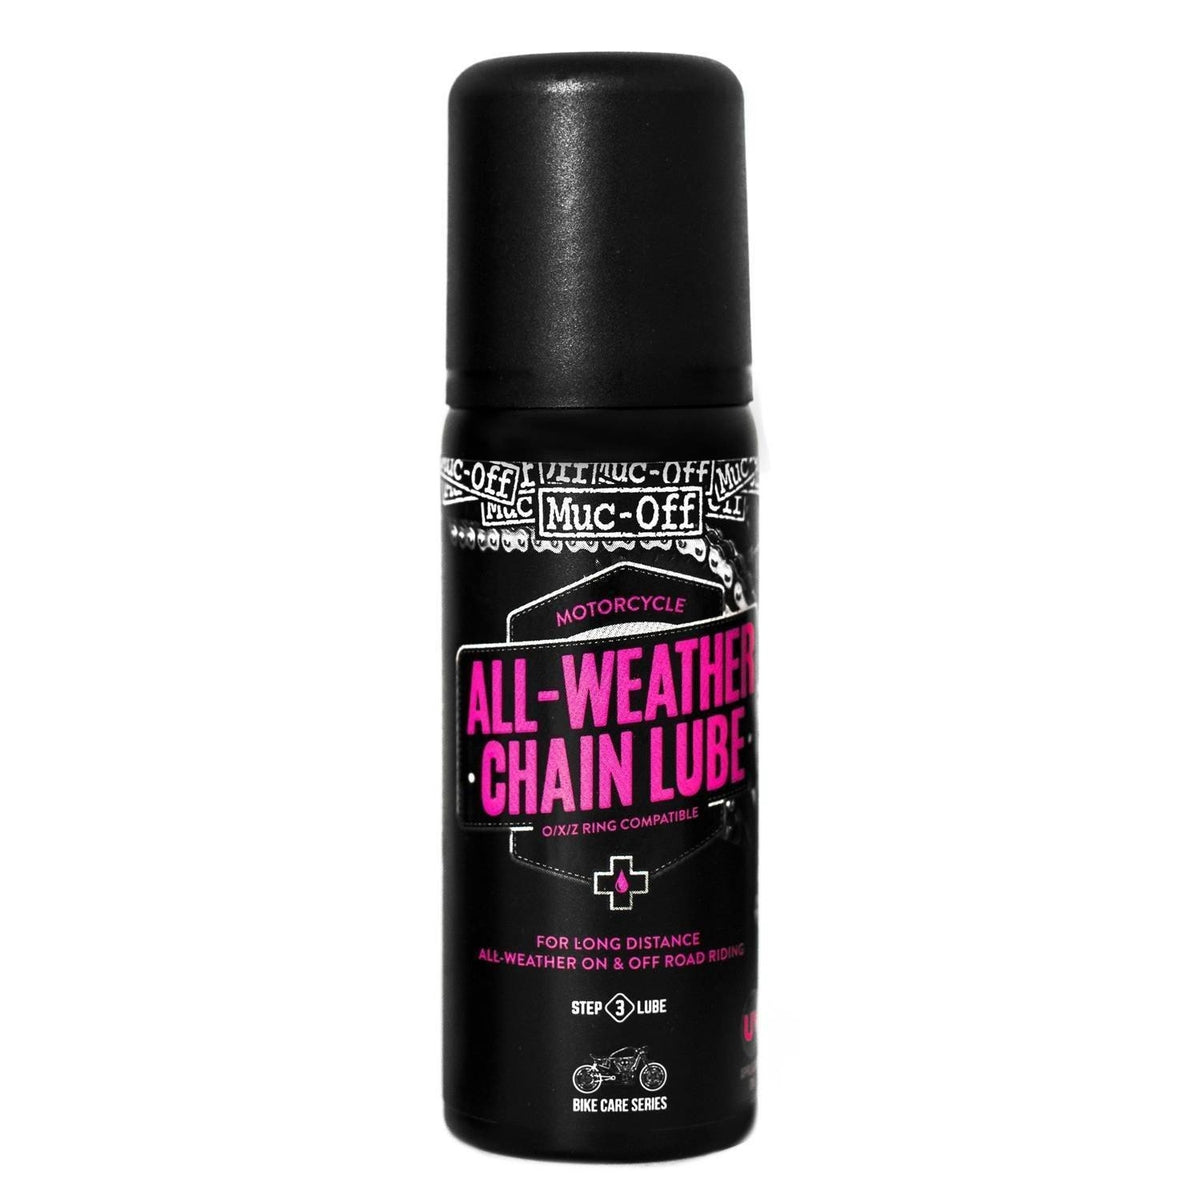 Muc-Off All-Weather Chain Lube